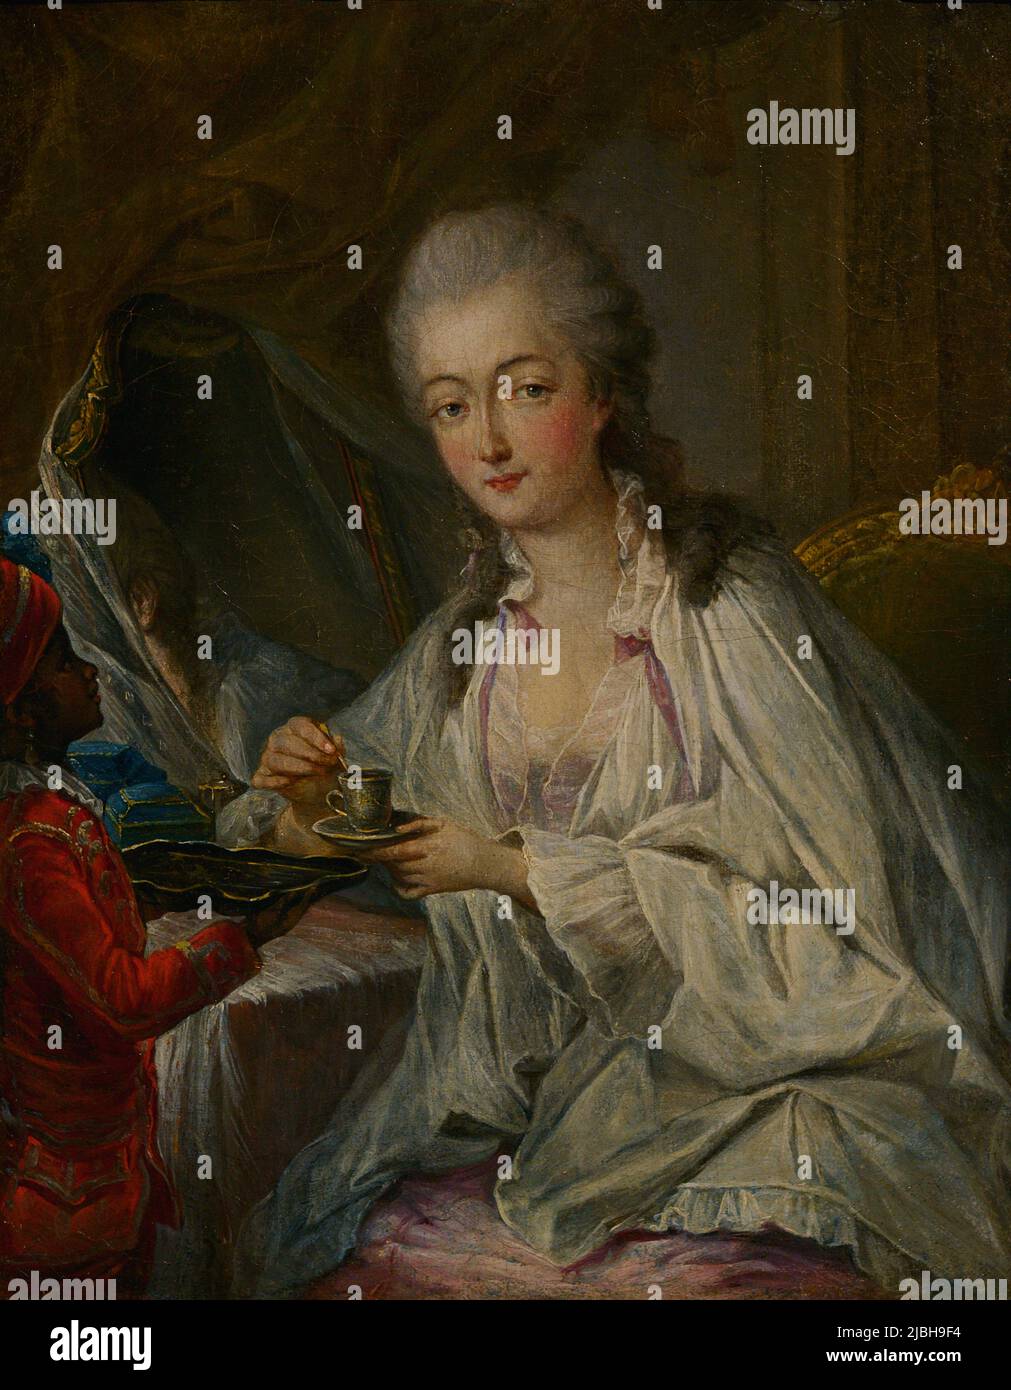 Portrait of Madame du Barry and the Page Zamore. Copy from late 18th century (?) after an engraving by Jean-Baptiste André Gauthier-Dagoty (1740-1786). Calouste Gulbenkian Museum. Lisbon, Portugal. Stock Photo